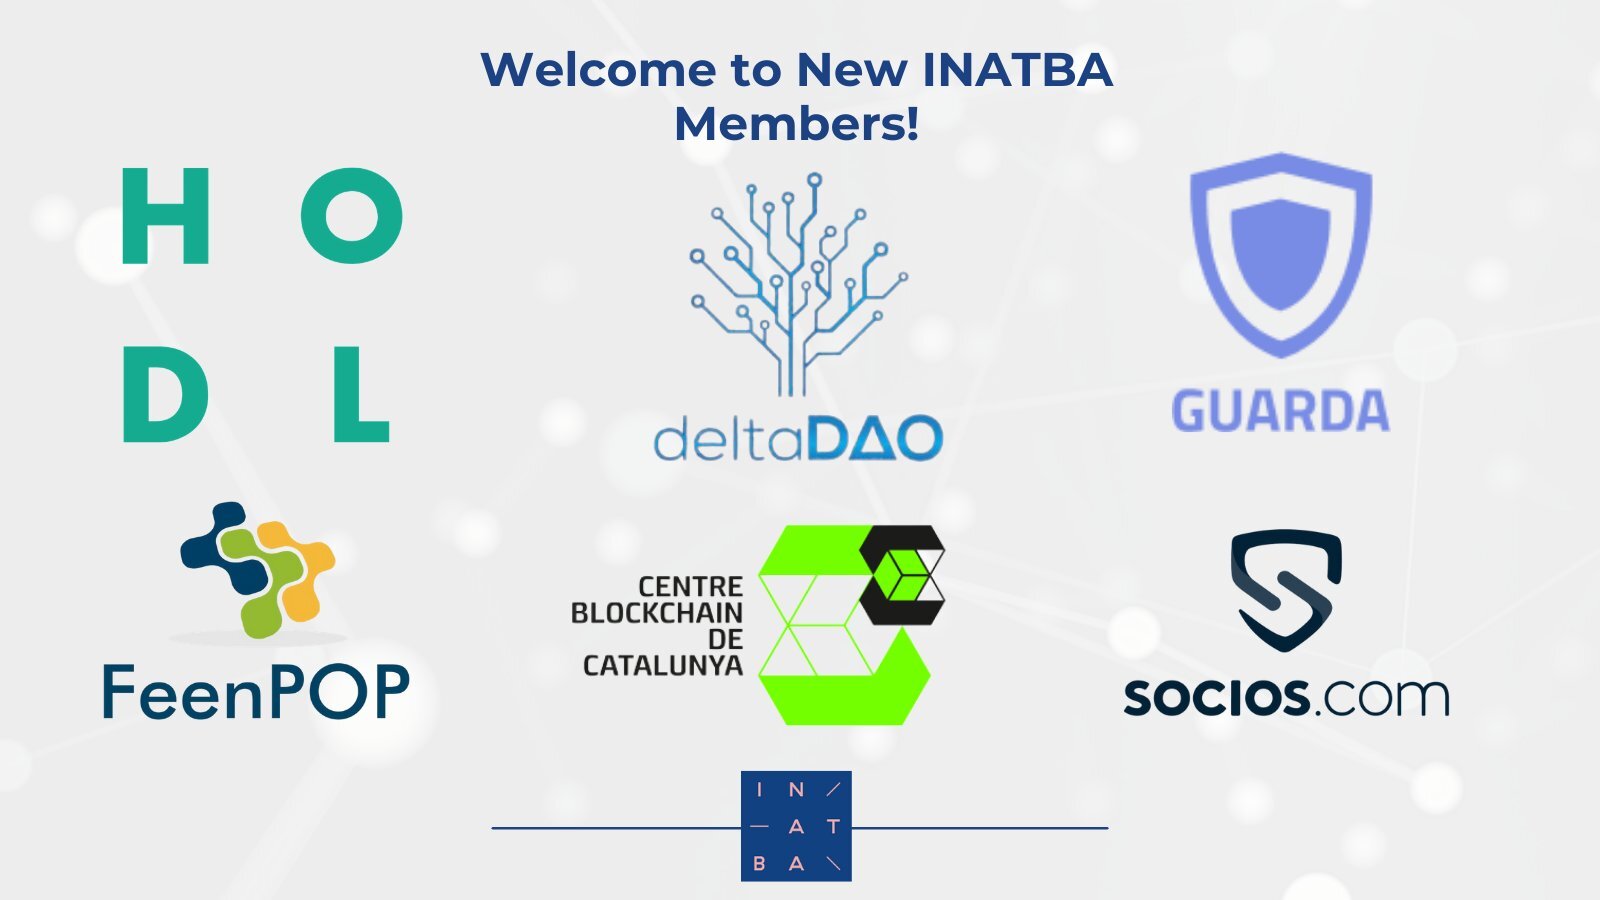 Hodl partners with INATBA